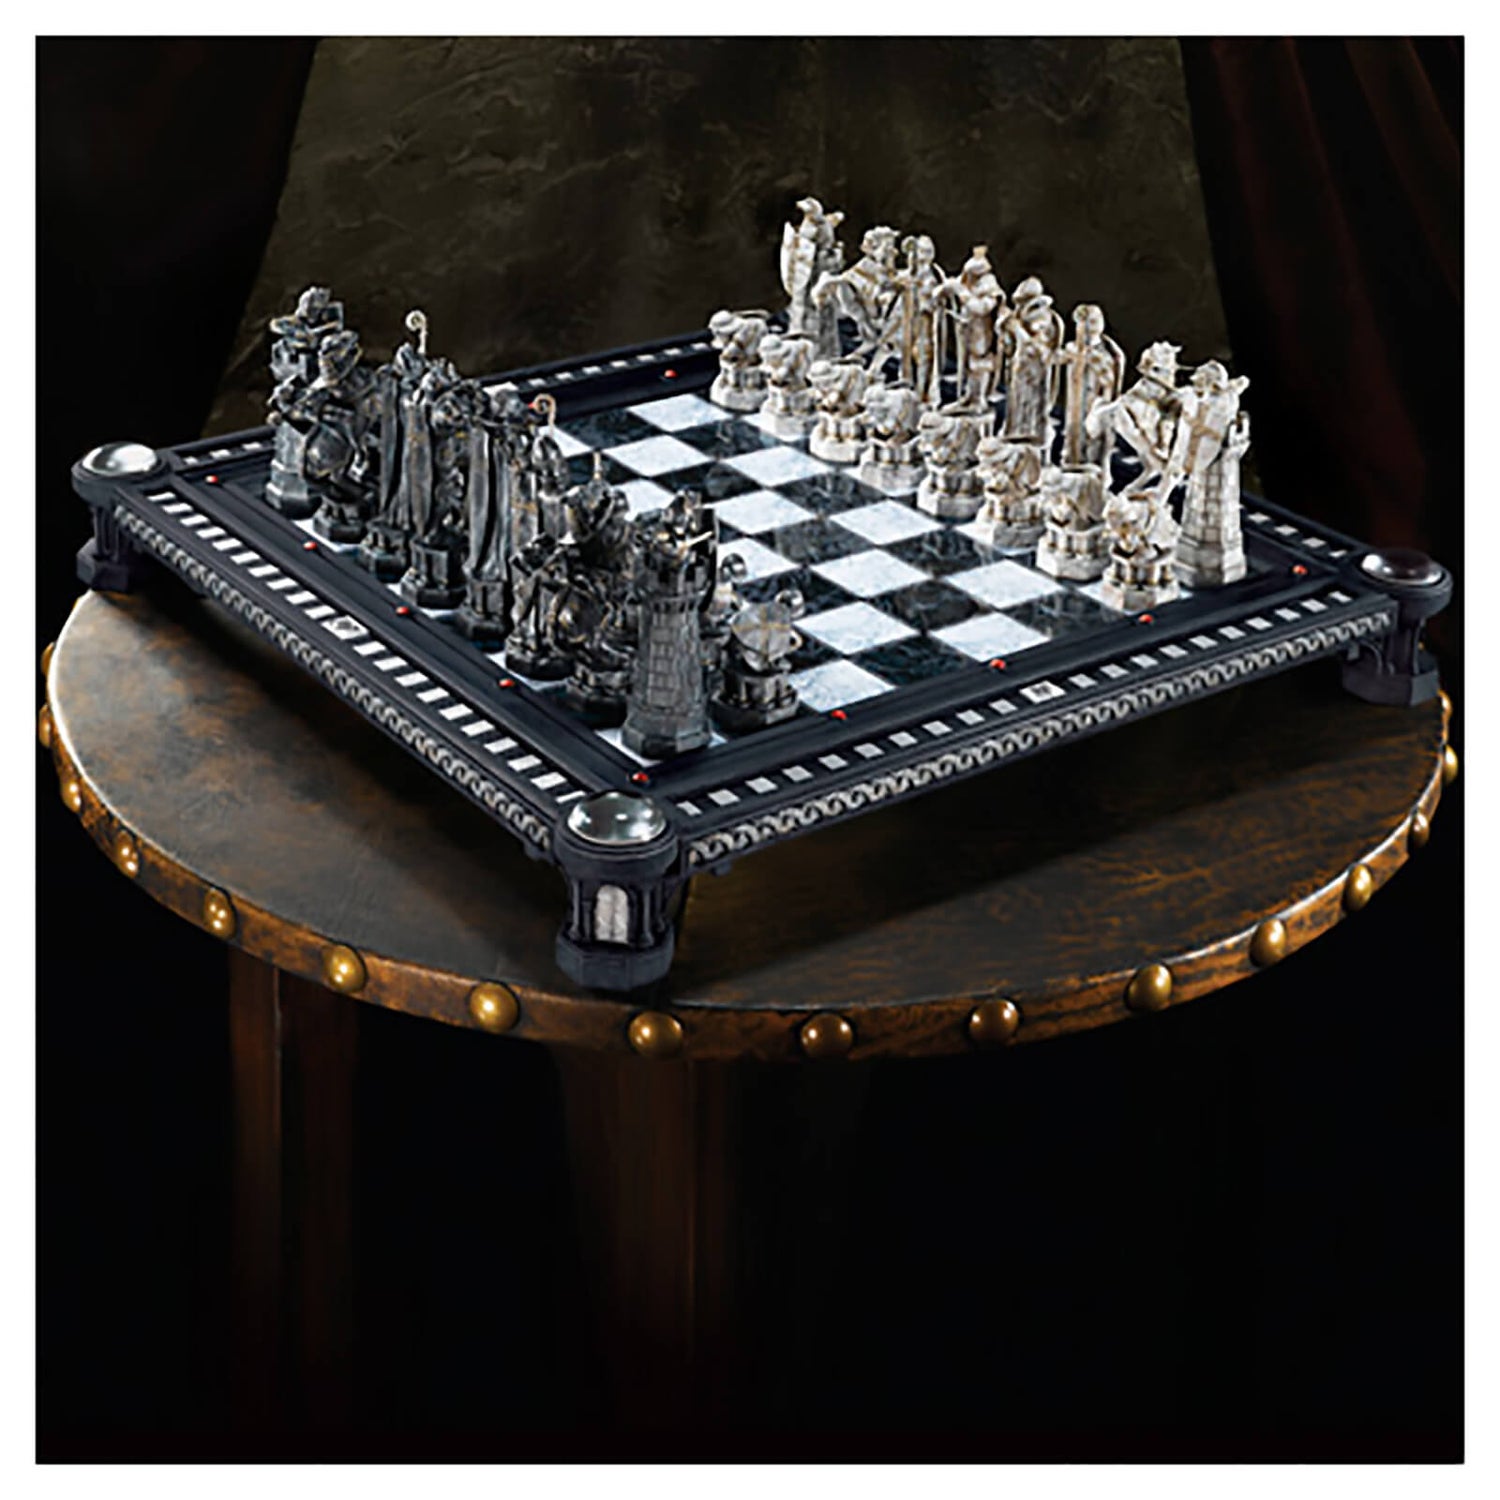 chess game Harry Potter Style